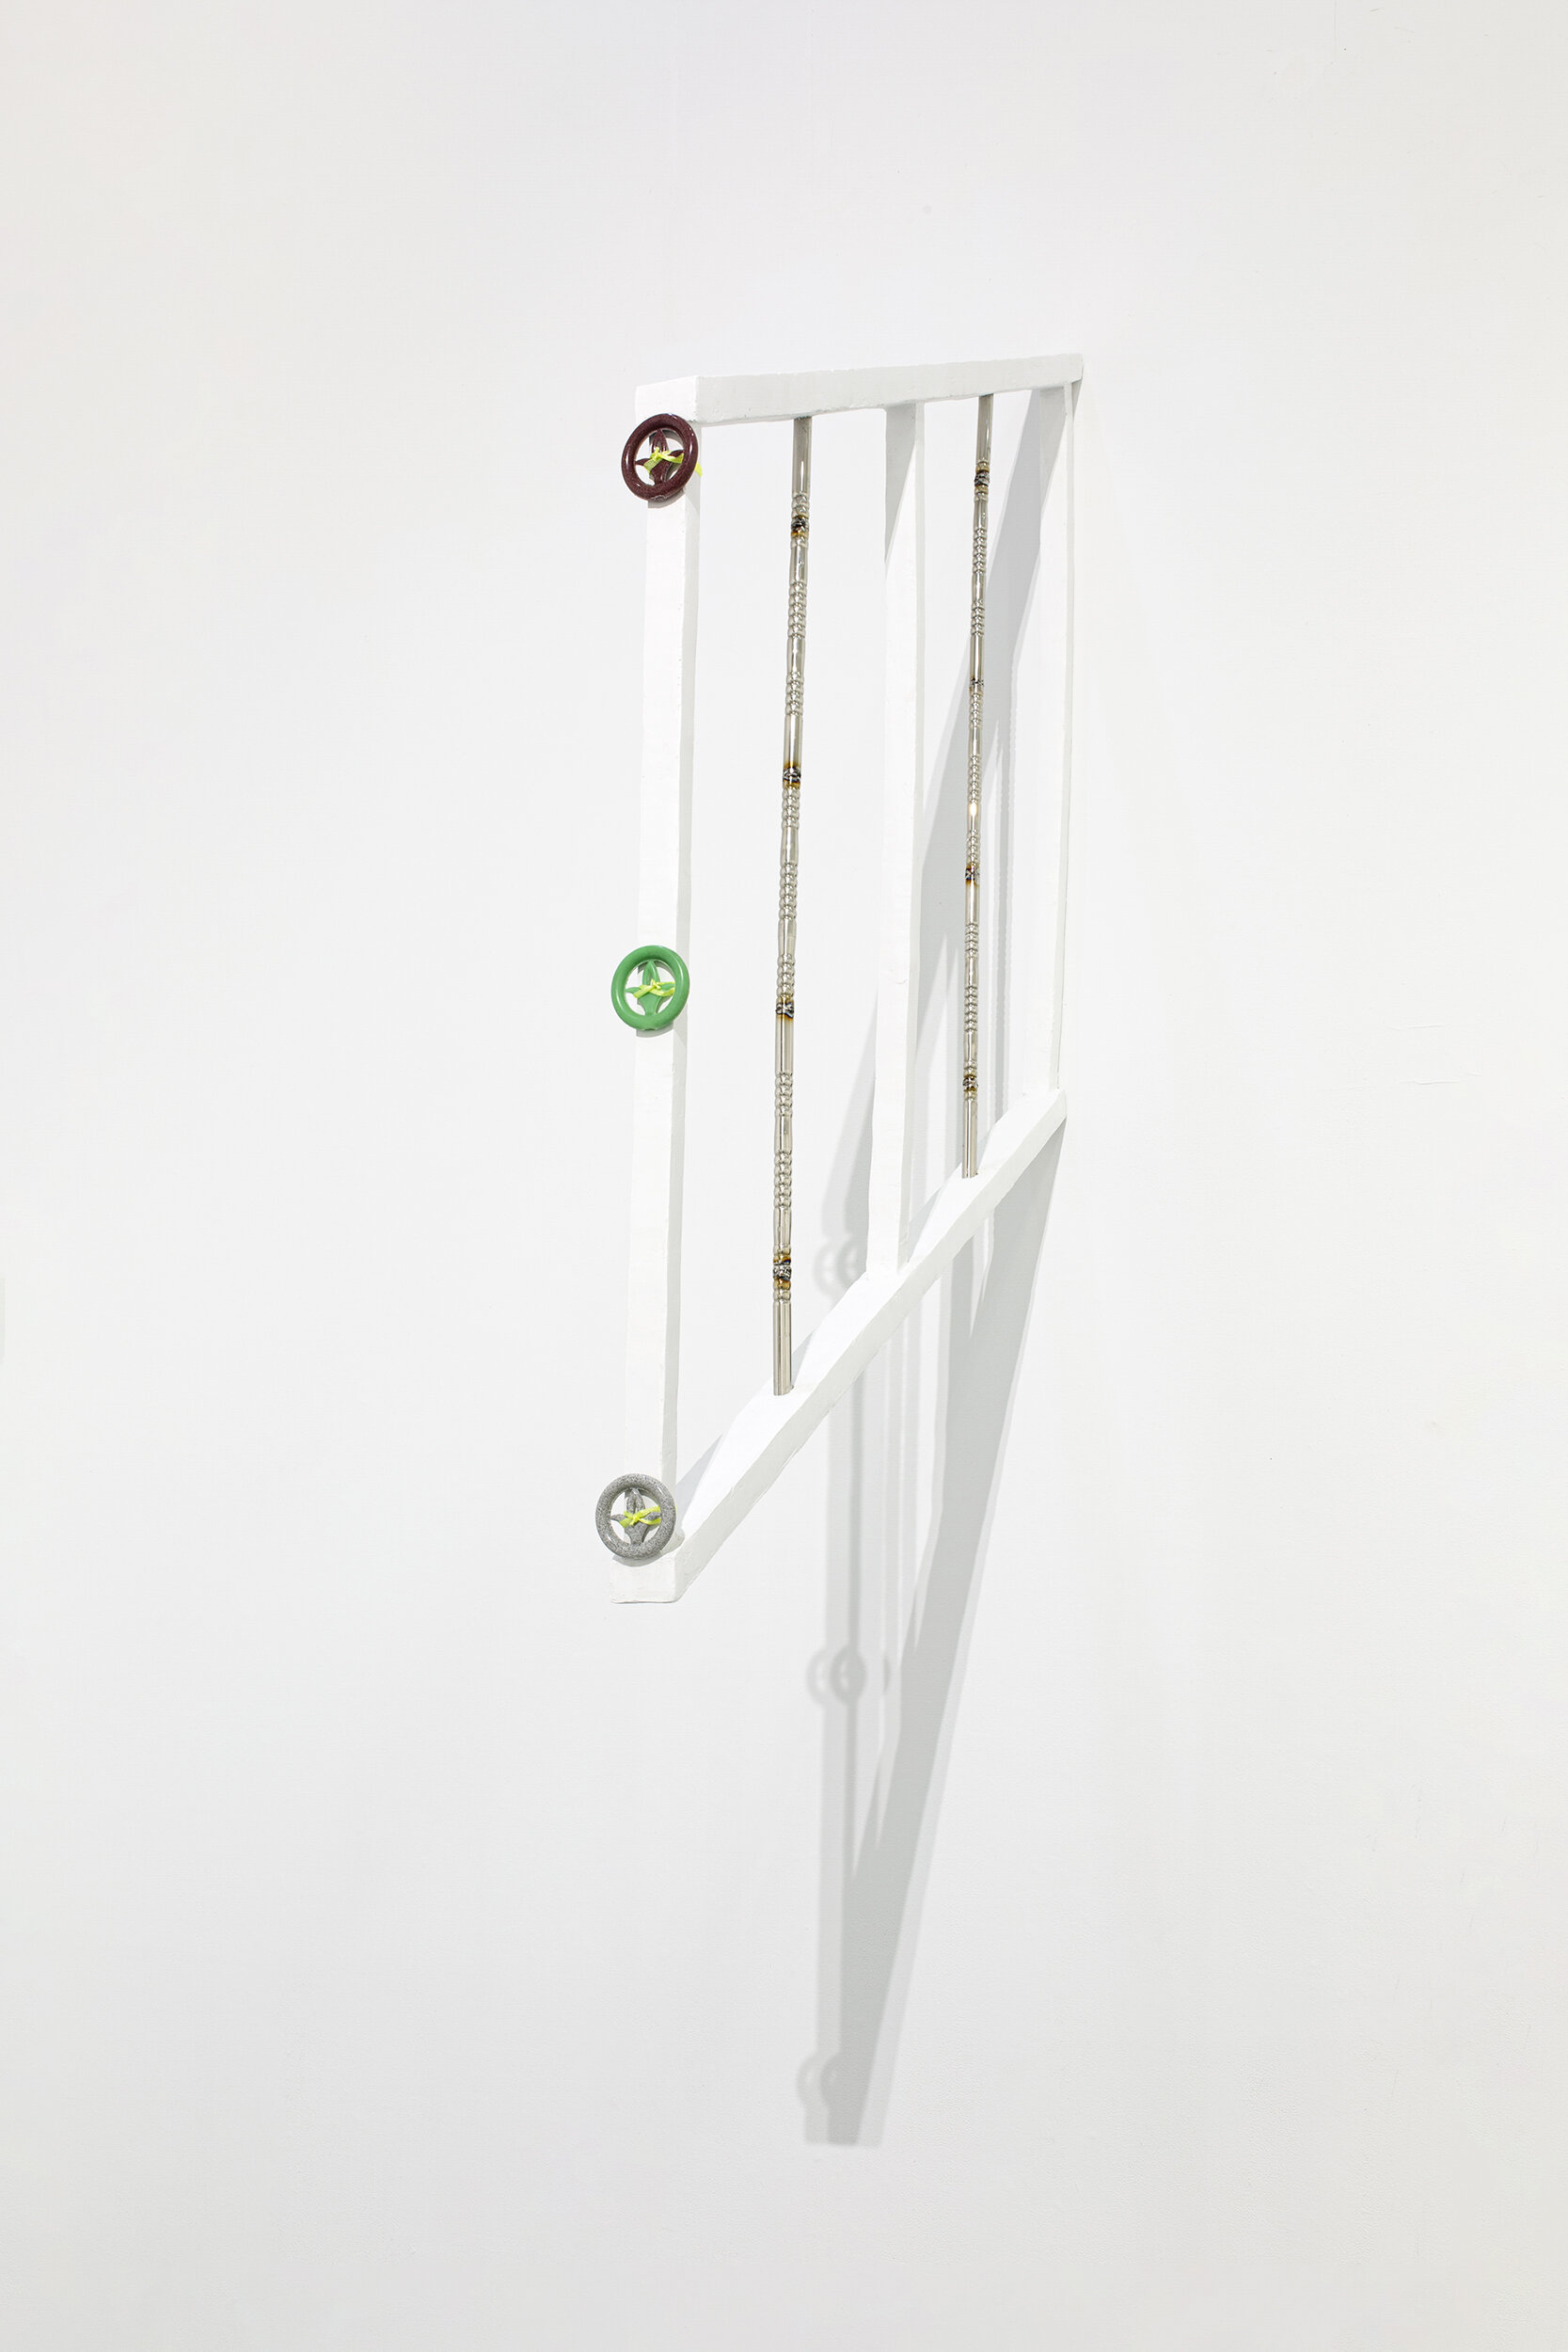  Anne Wu  Once Forgotten, Twice Remembered (Turning to Ghosts for Help) , 2020 Stainless steel, polystyrene, joint compound, plaster, paint, cast plastic, pigment, plastic packing rope, price sticker 48 x 4 x 60 inches (122 x 10 x 152 cm) photo by So